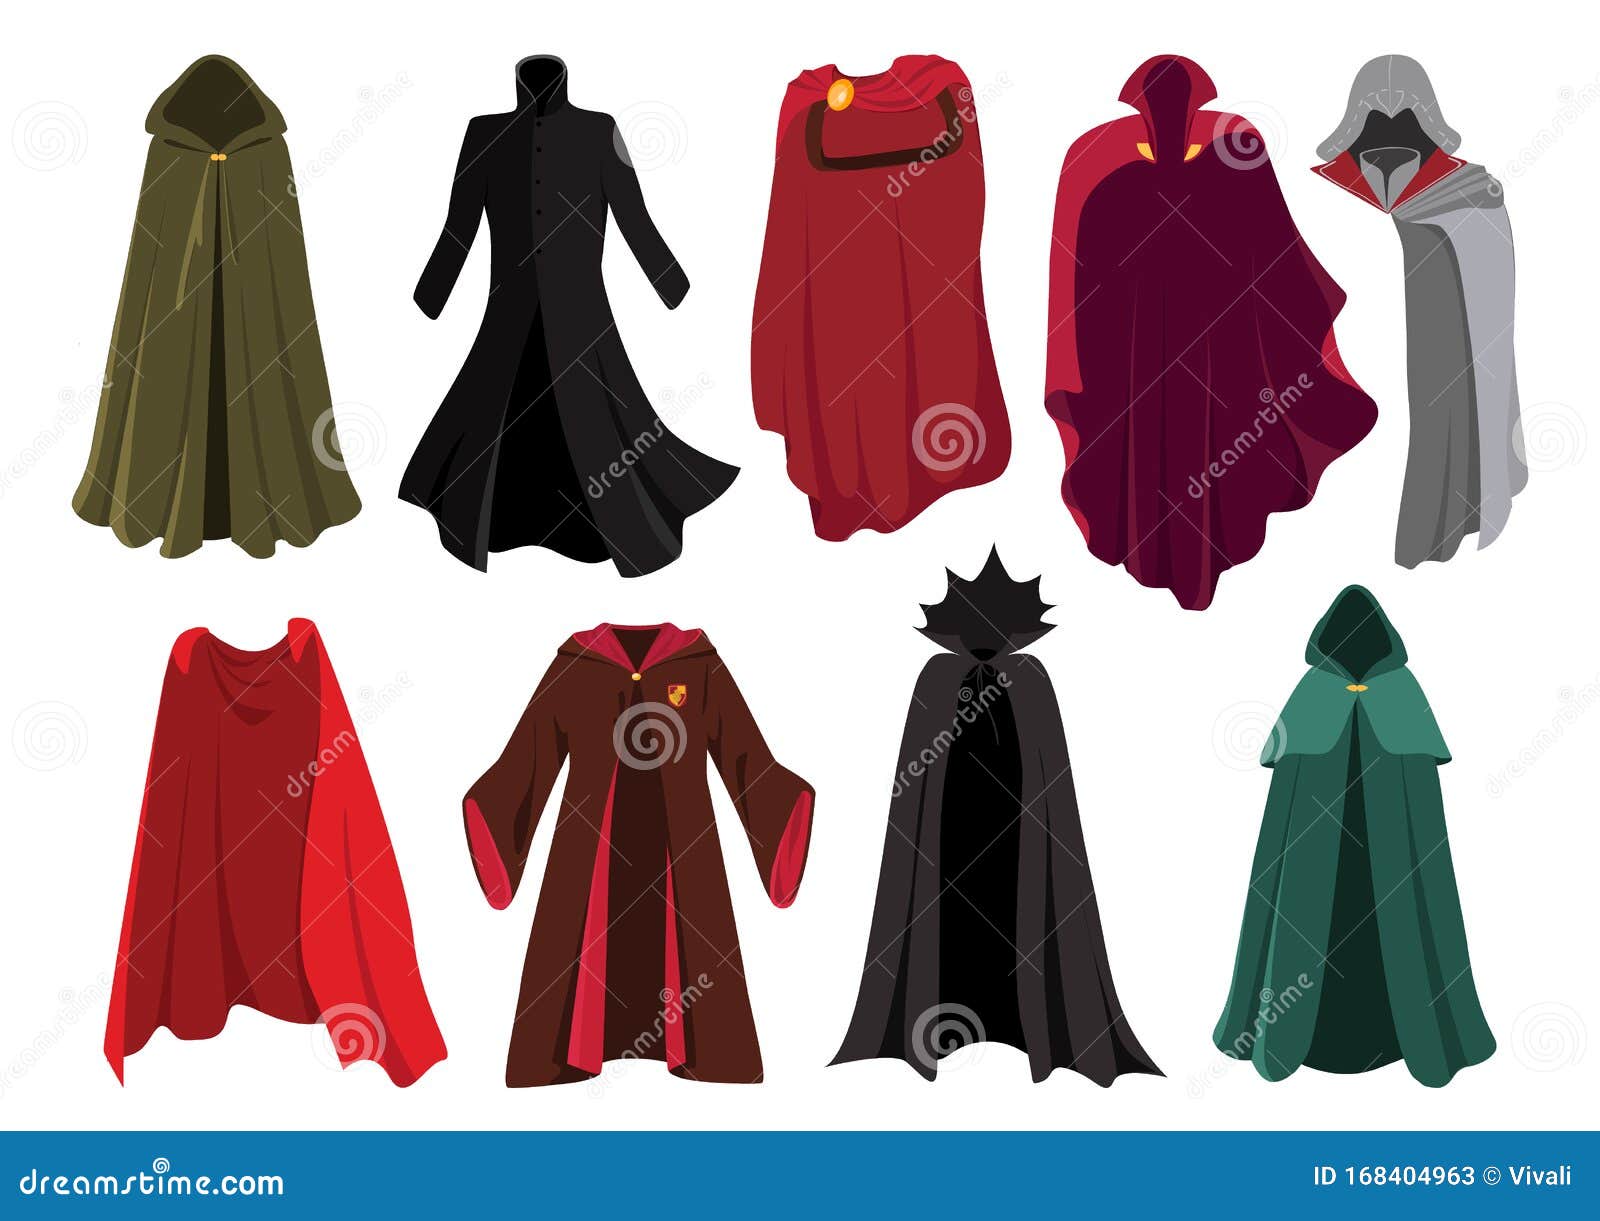 Wcapes